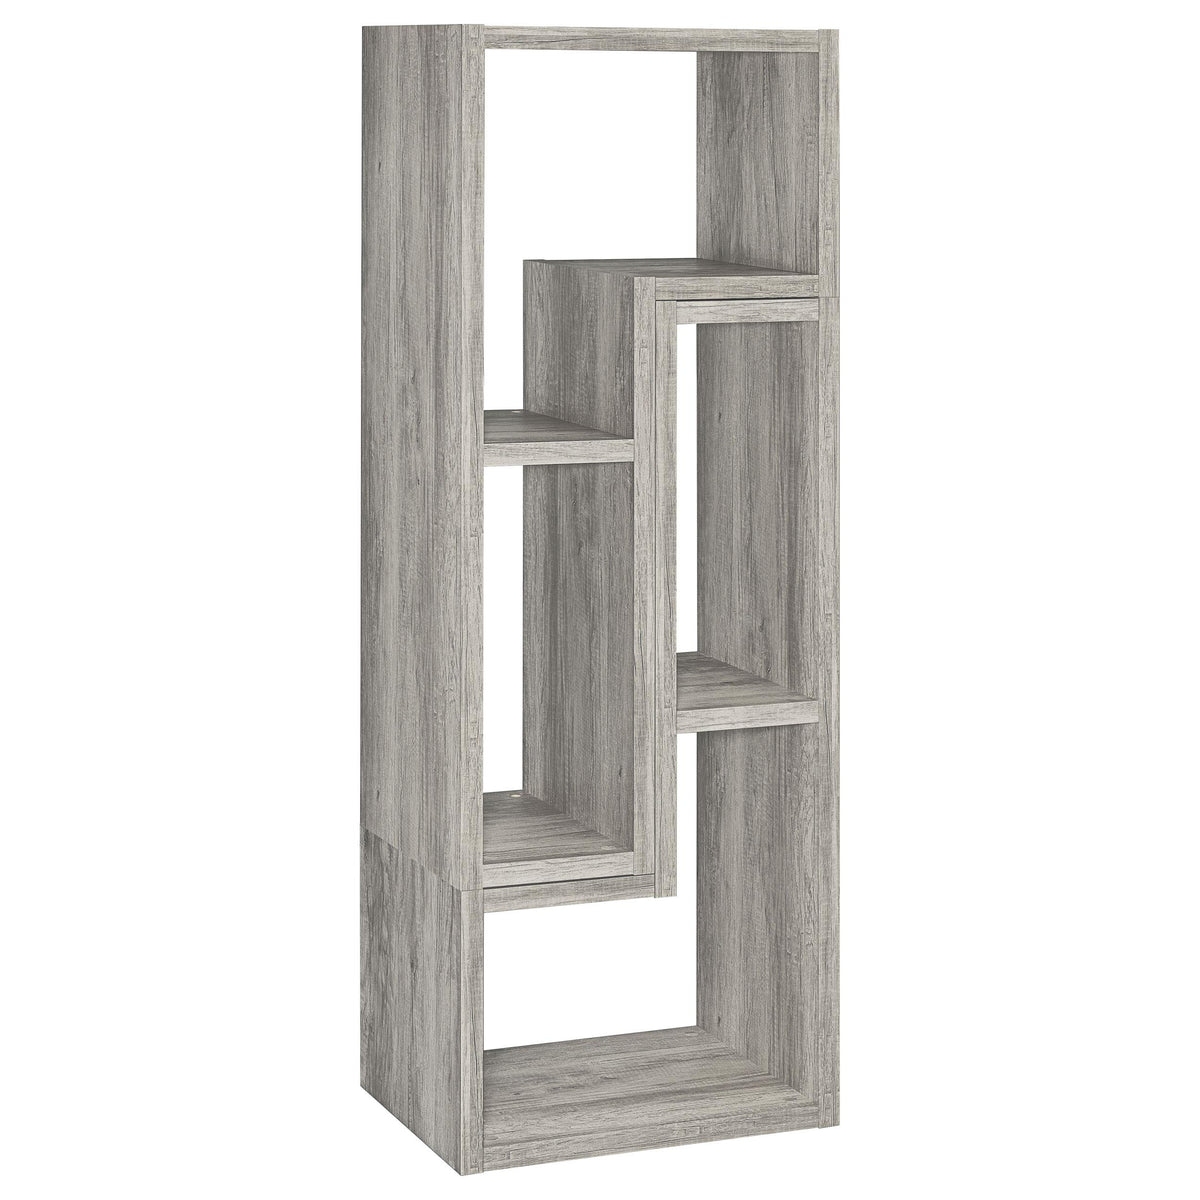 Velma Convertable Bookcase and TV Console Grey Driftwood Velma Convertable Bookcase and TV Console Grey Driftwood Half Price Furniture